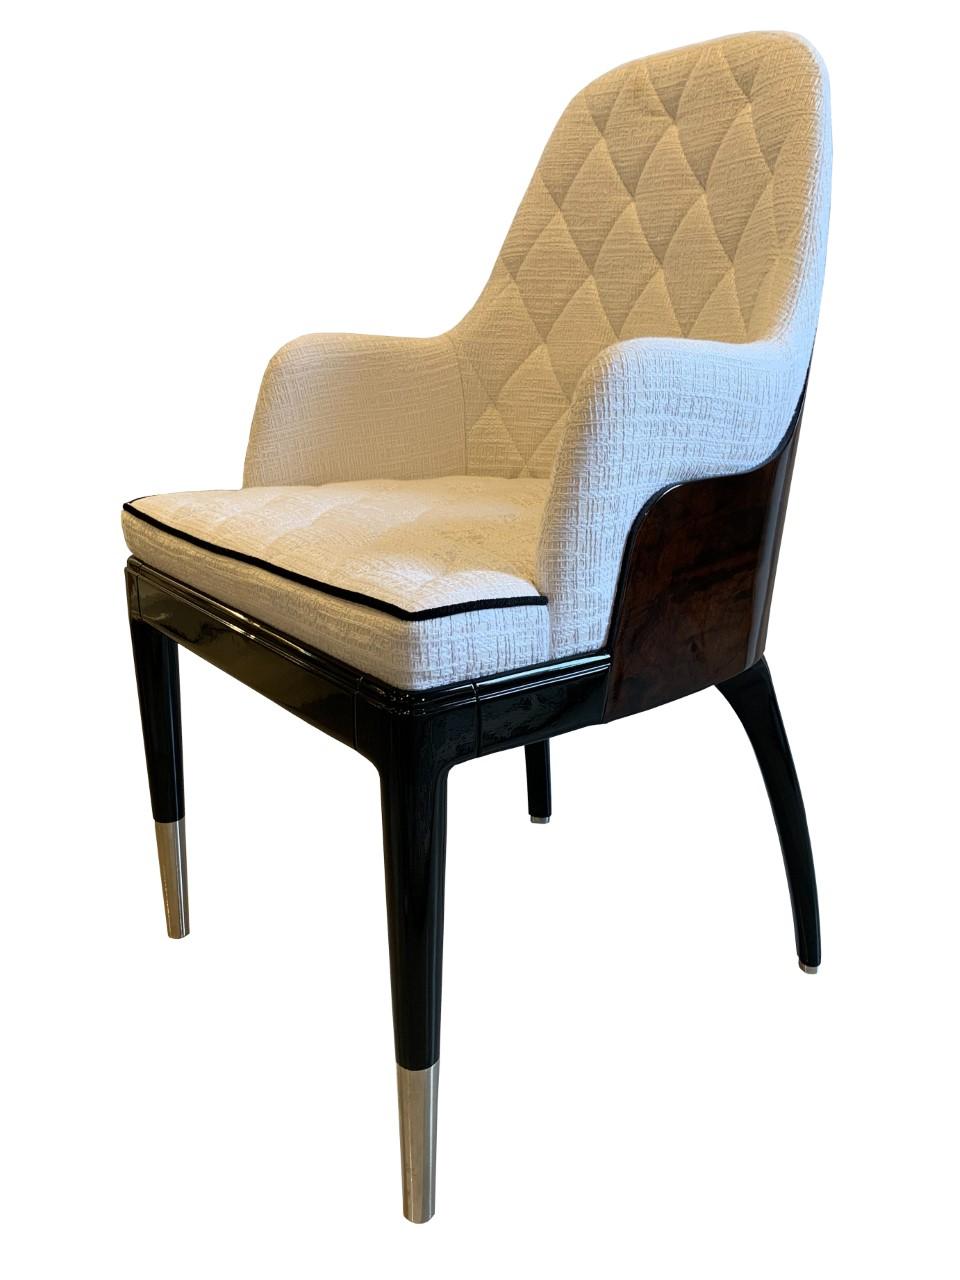 Charla dining chair is a splendid and stylish chair with boundless elegance. This marvelous chair design is the perfect example of timeless lines with a modern twist, by using a complexity of luxurious materials, such as velvet, brass and lacquered